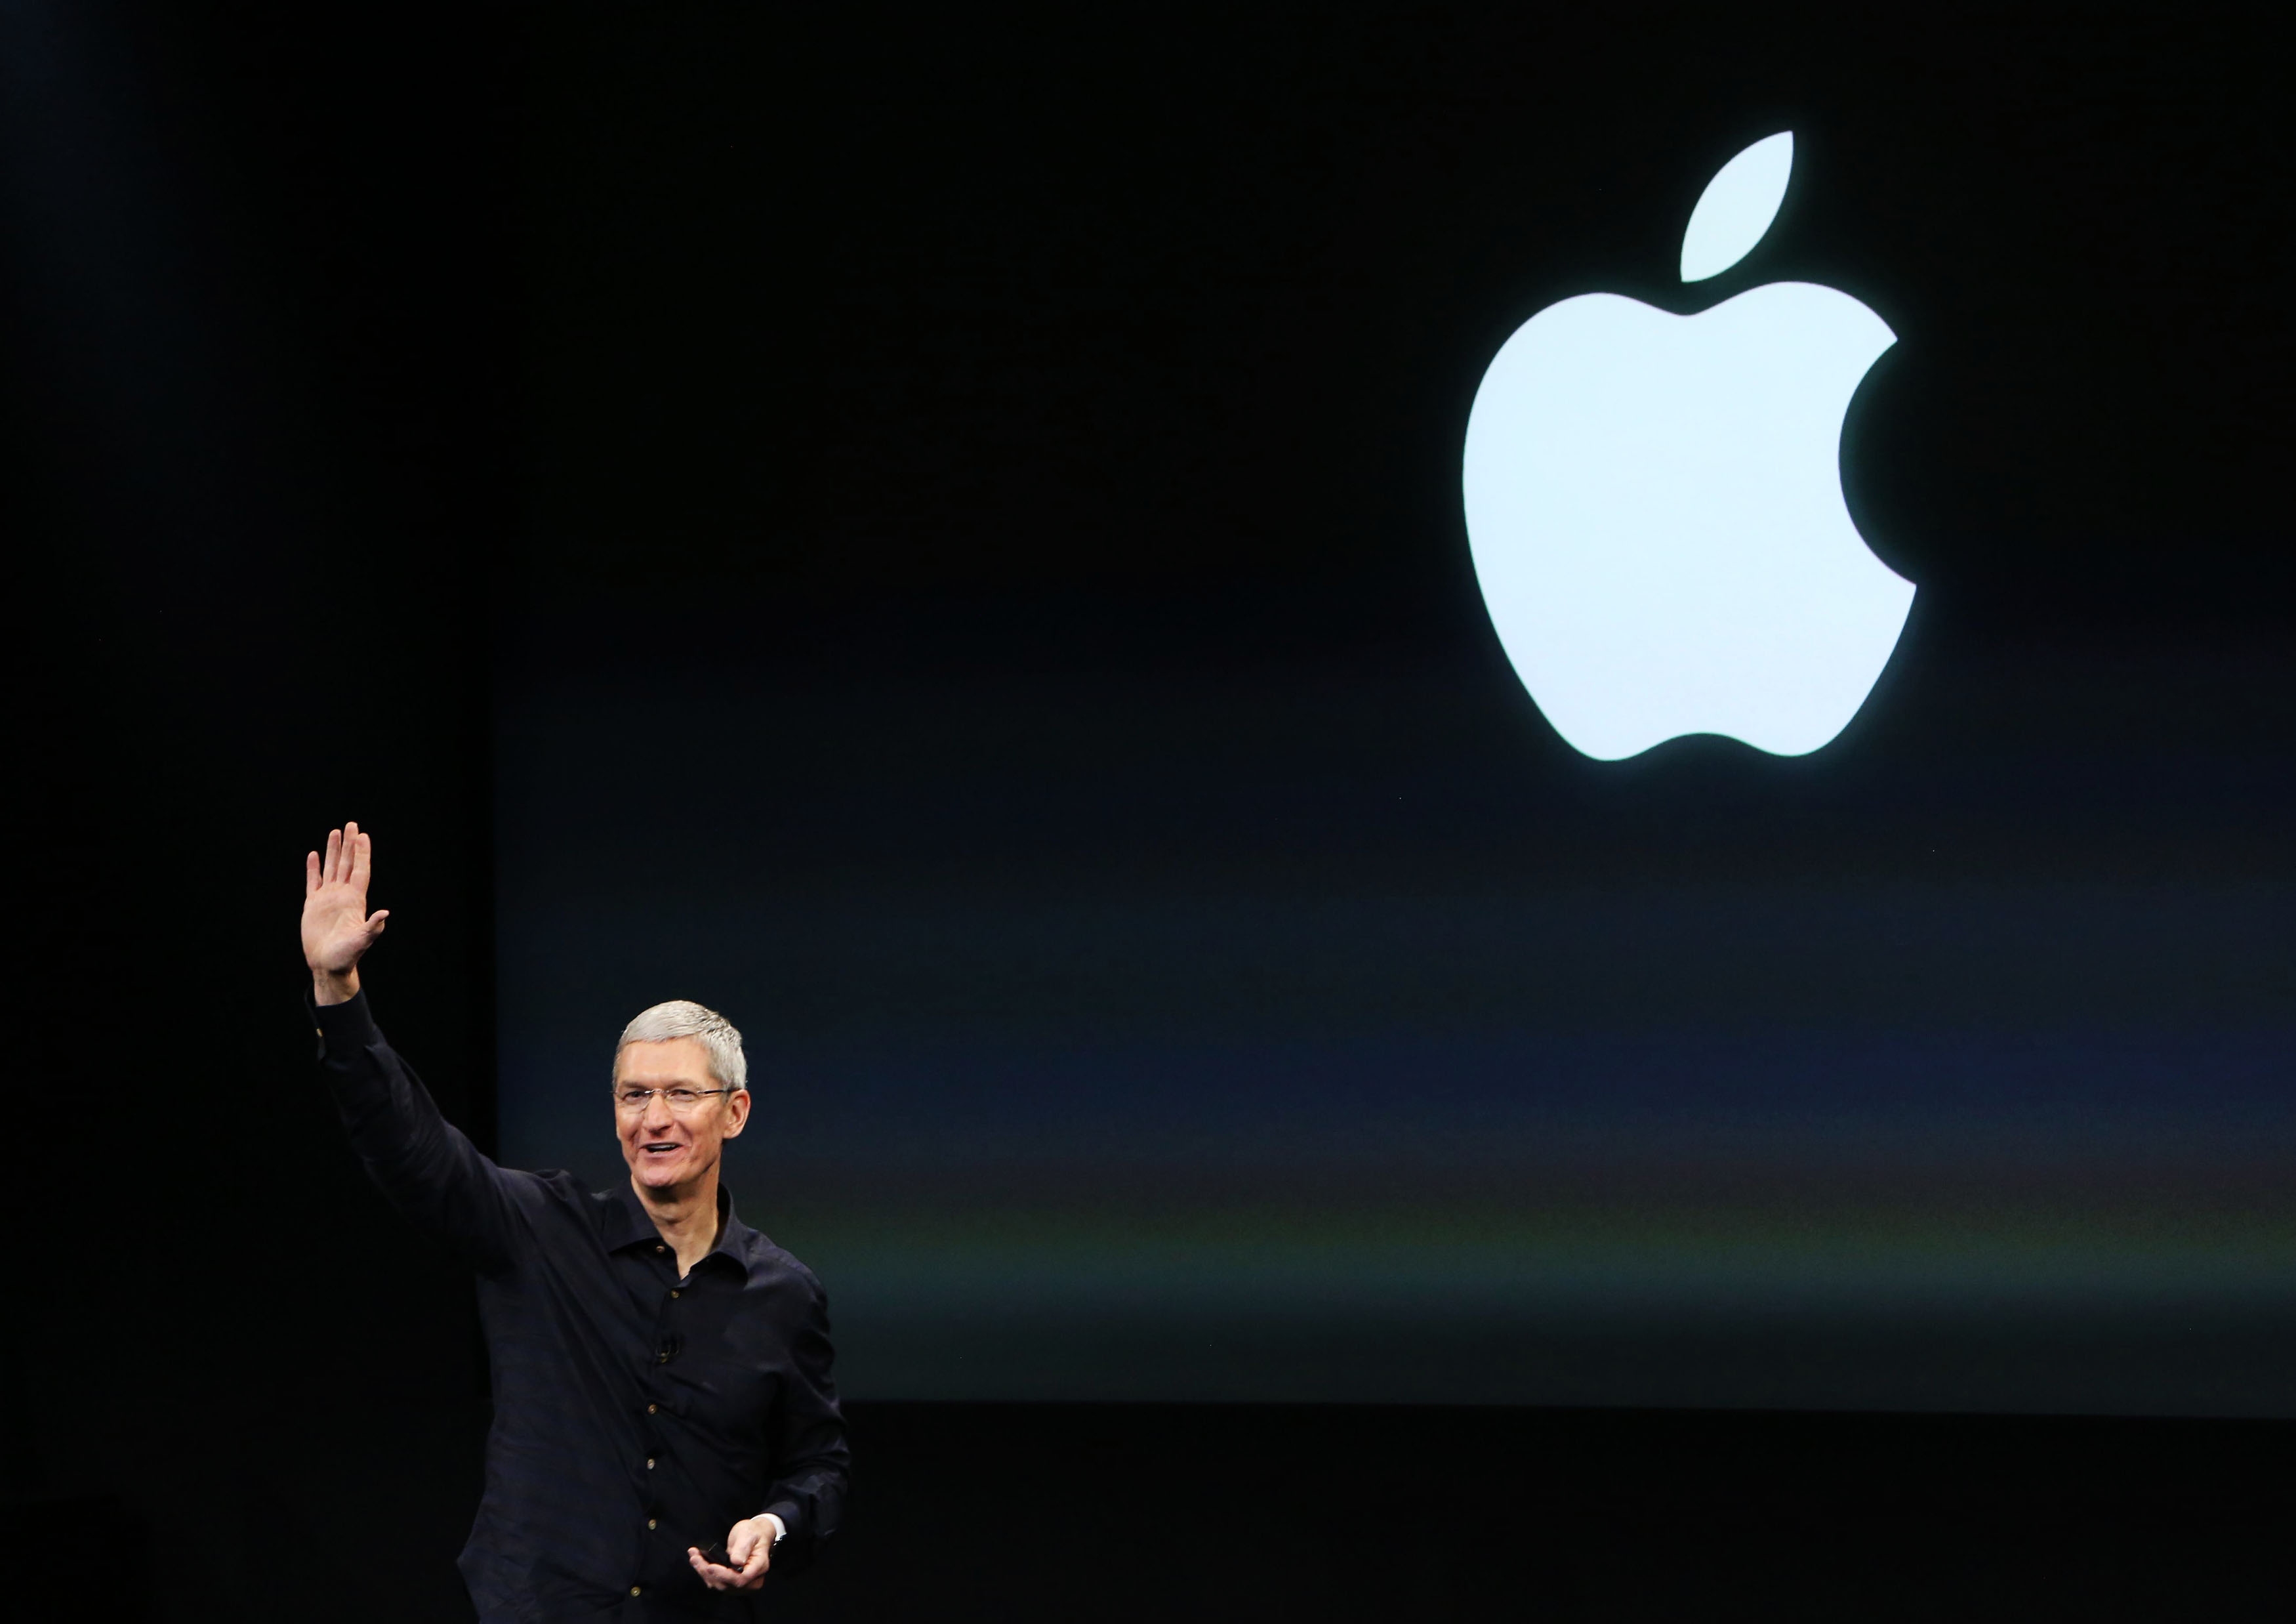 Apple CEO Tim Cook speaks during a presentation at Apple headquarters in Cupertino in this file photo